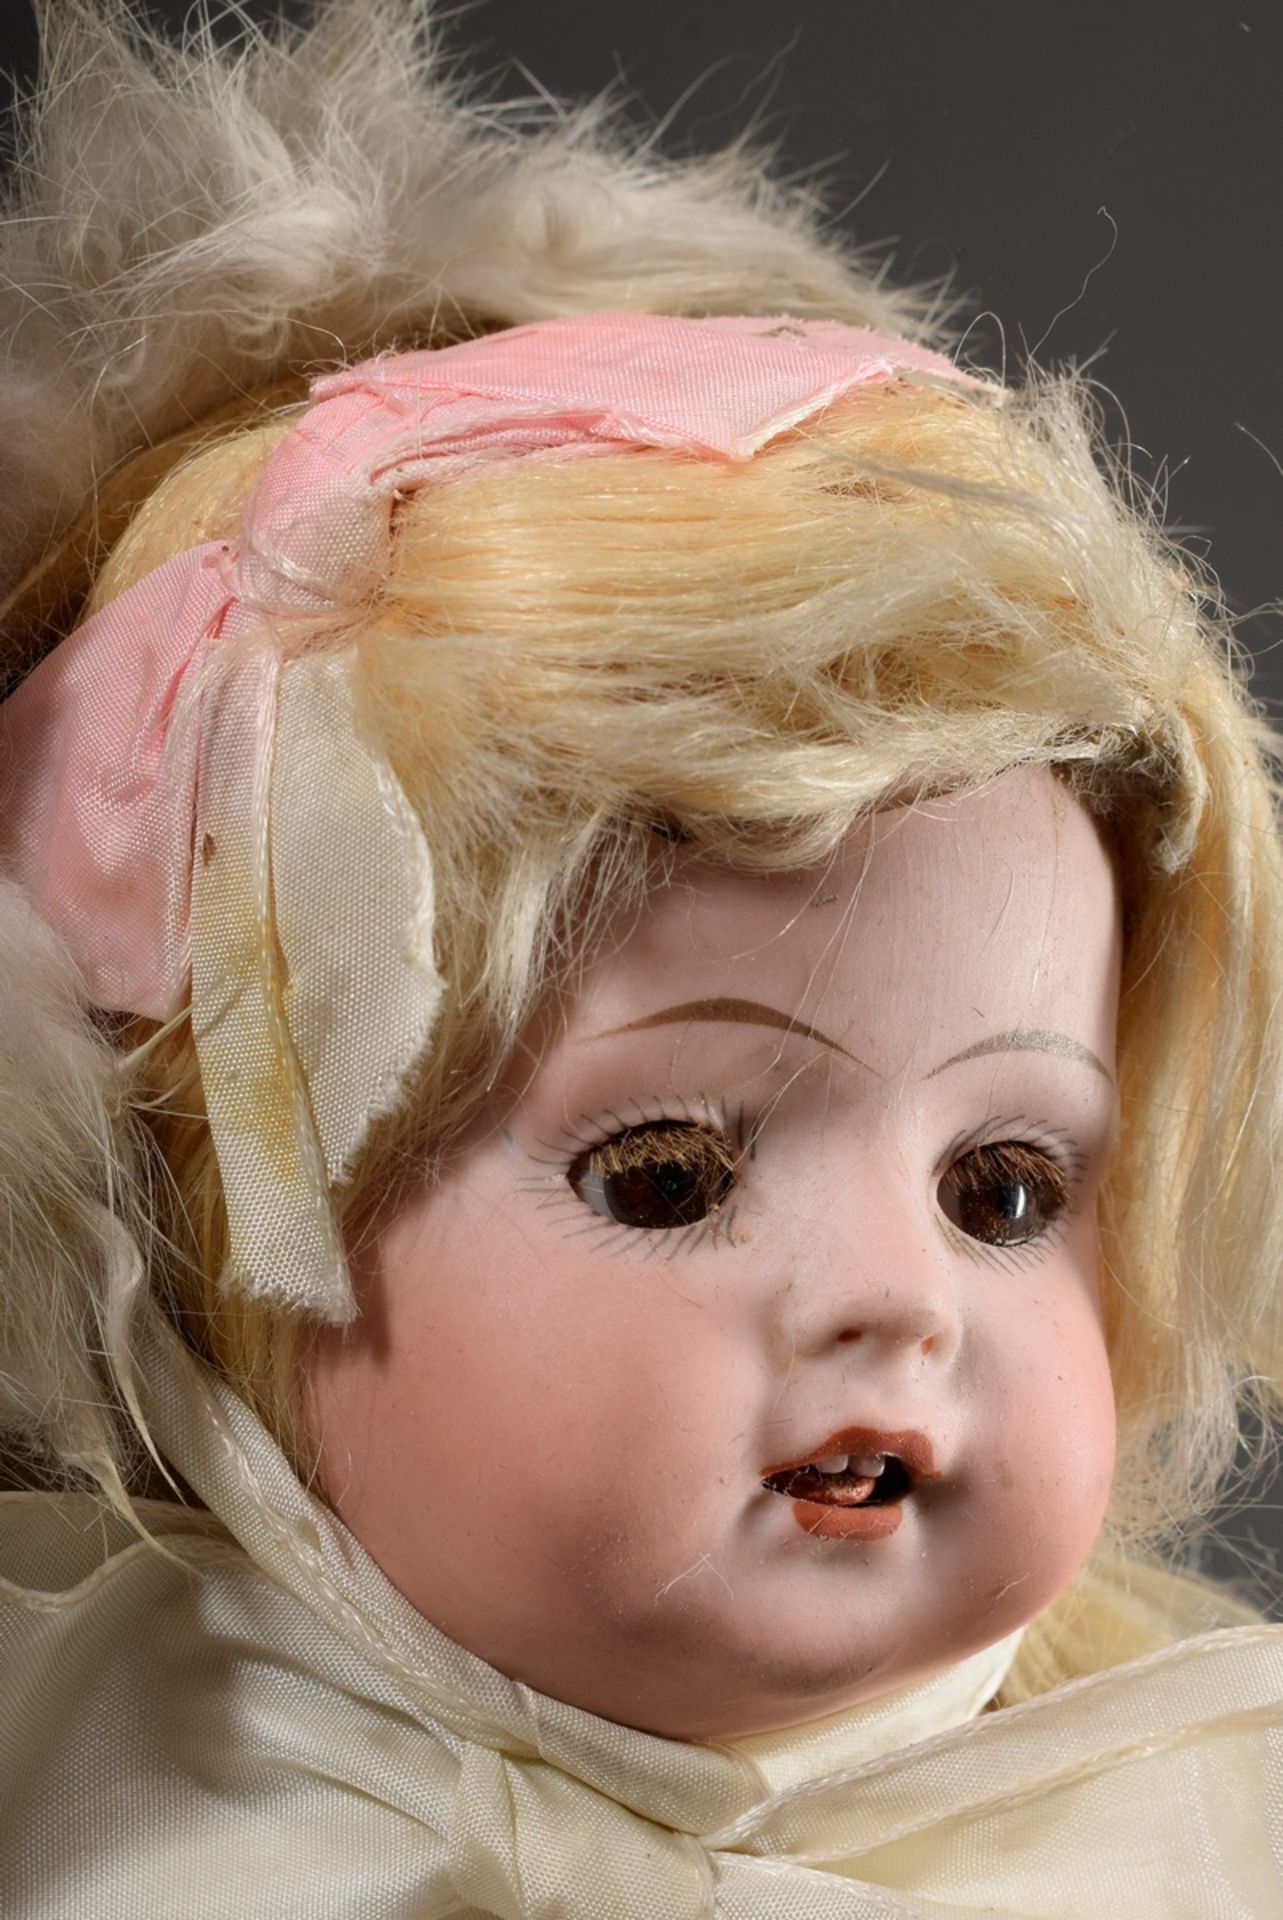 Lamp with "Winter Angel" doll, porcelain crank head and jointed body, real hair wig, glass eyes, op - Image 6 of 7